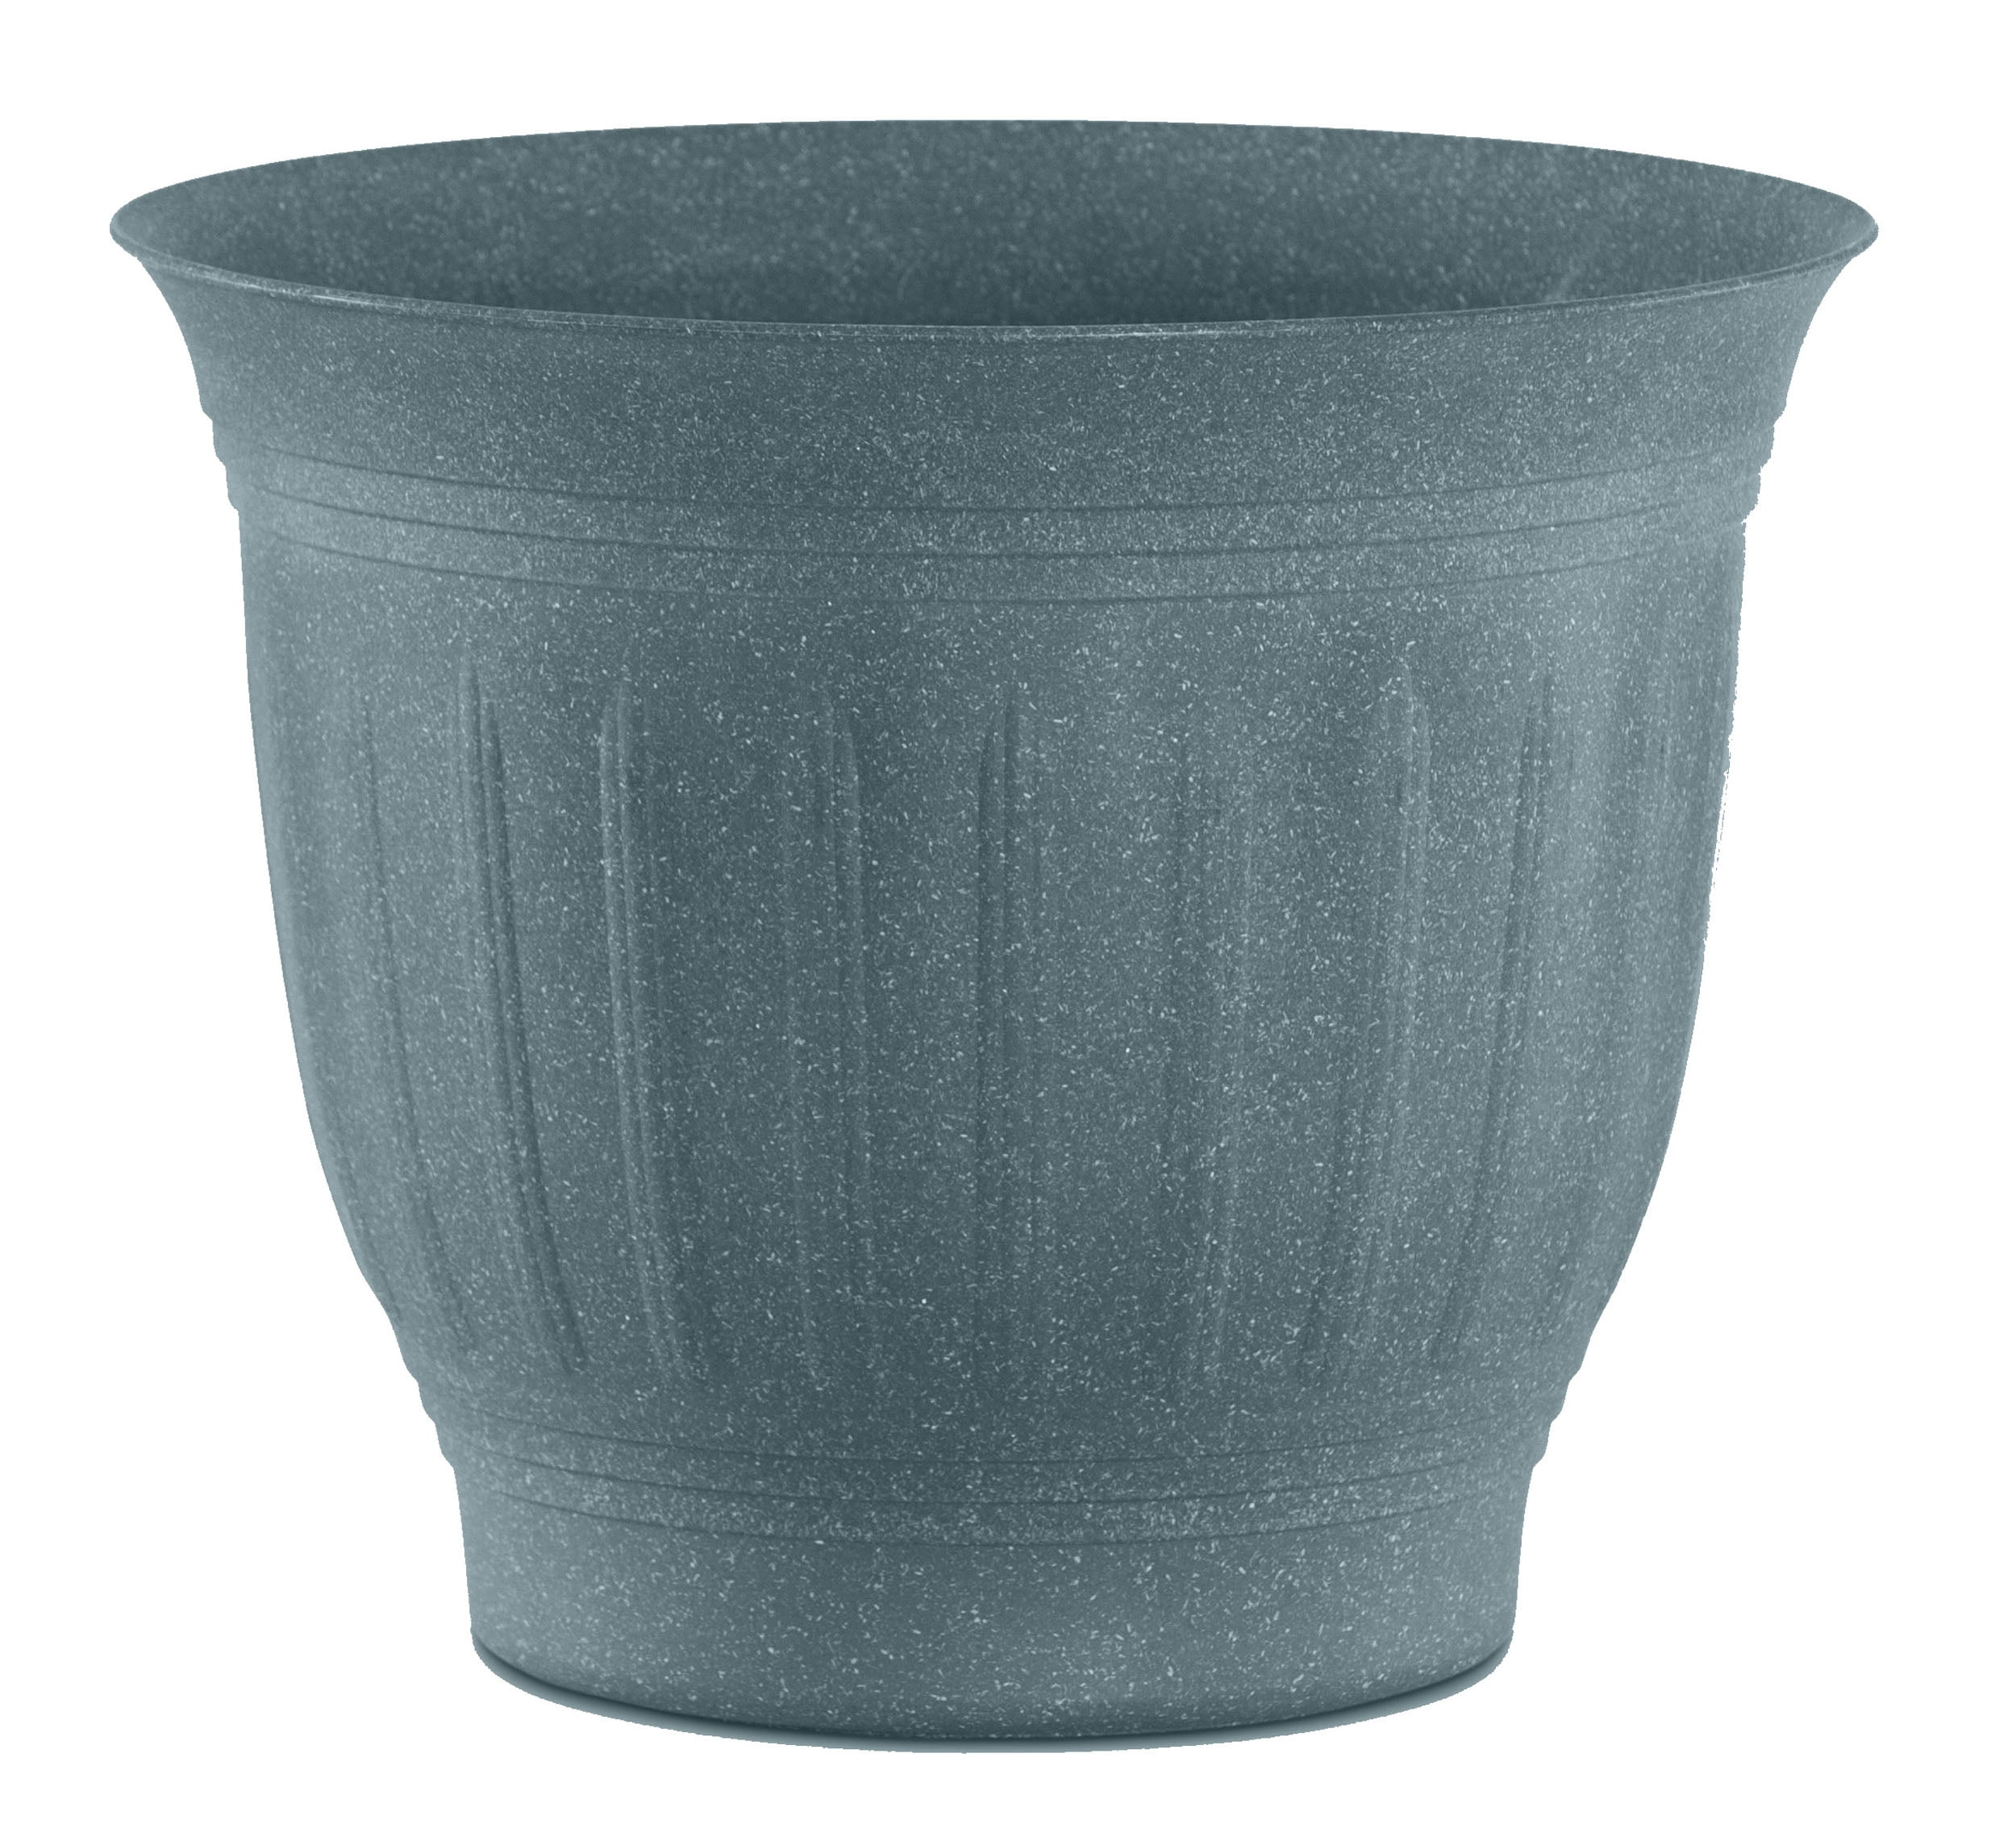 Fiskars 12 Inch Ariana Planter with Self-Watering Grid Thyme Green 20-56412 Pots 